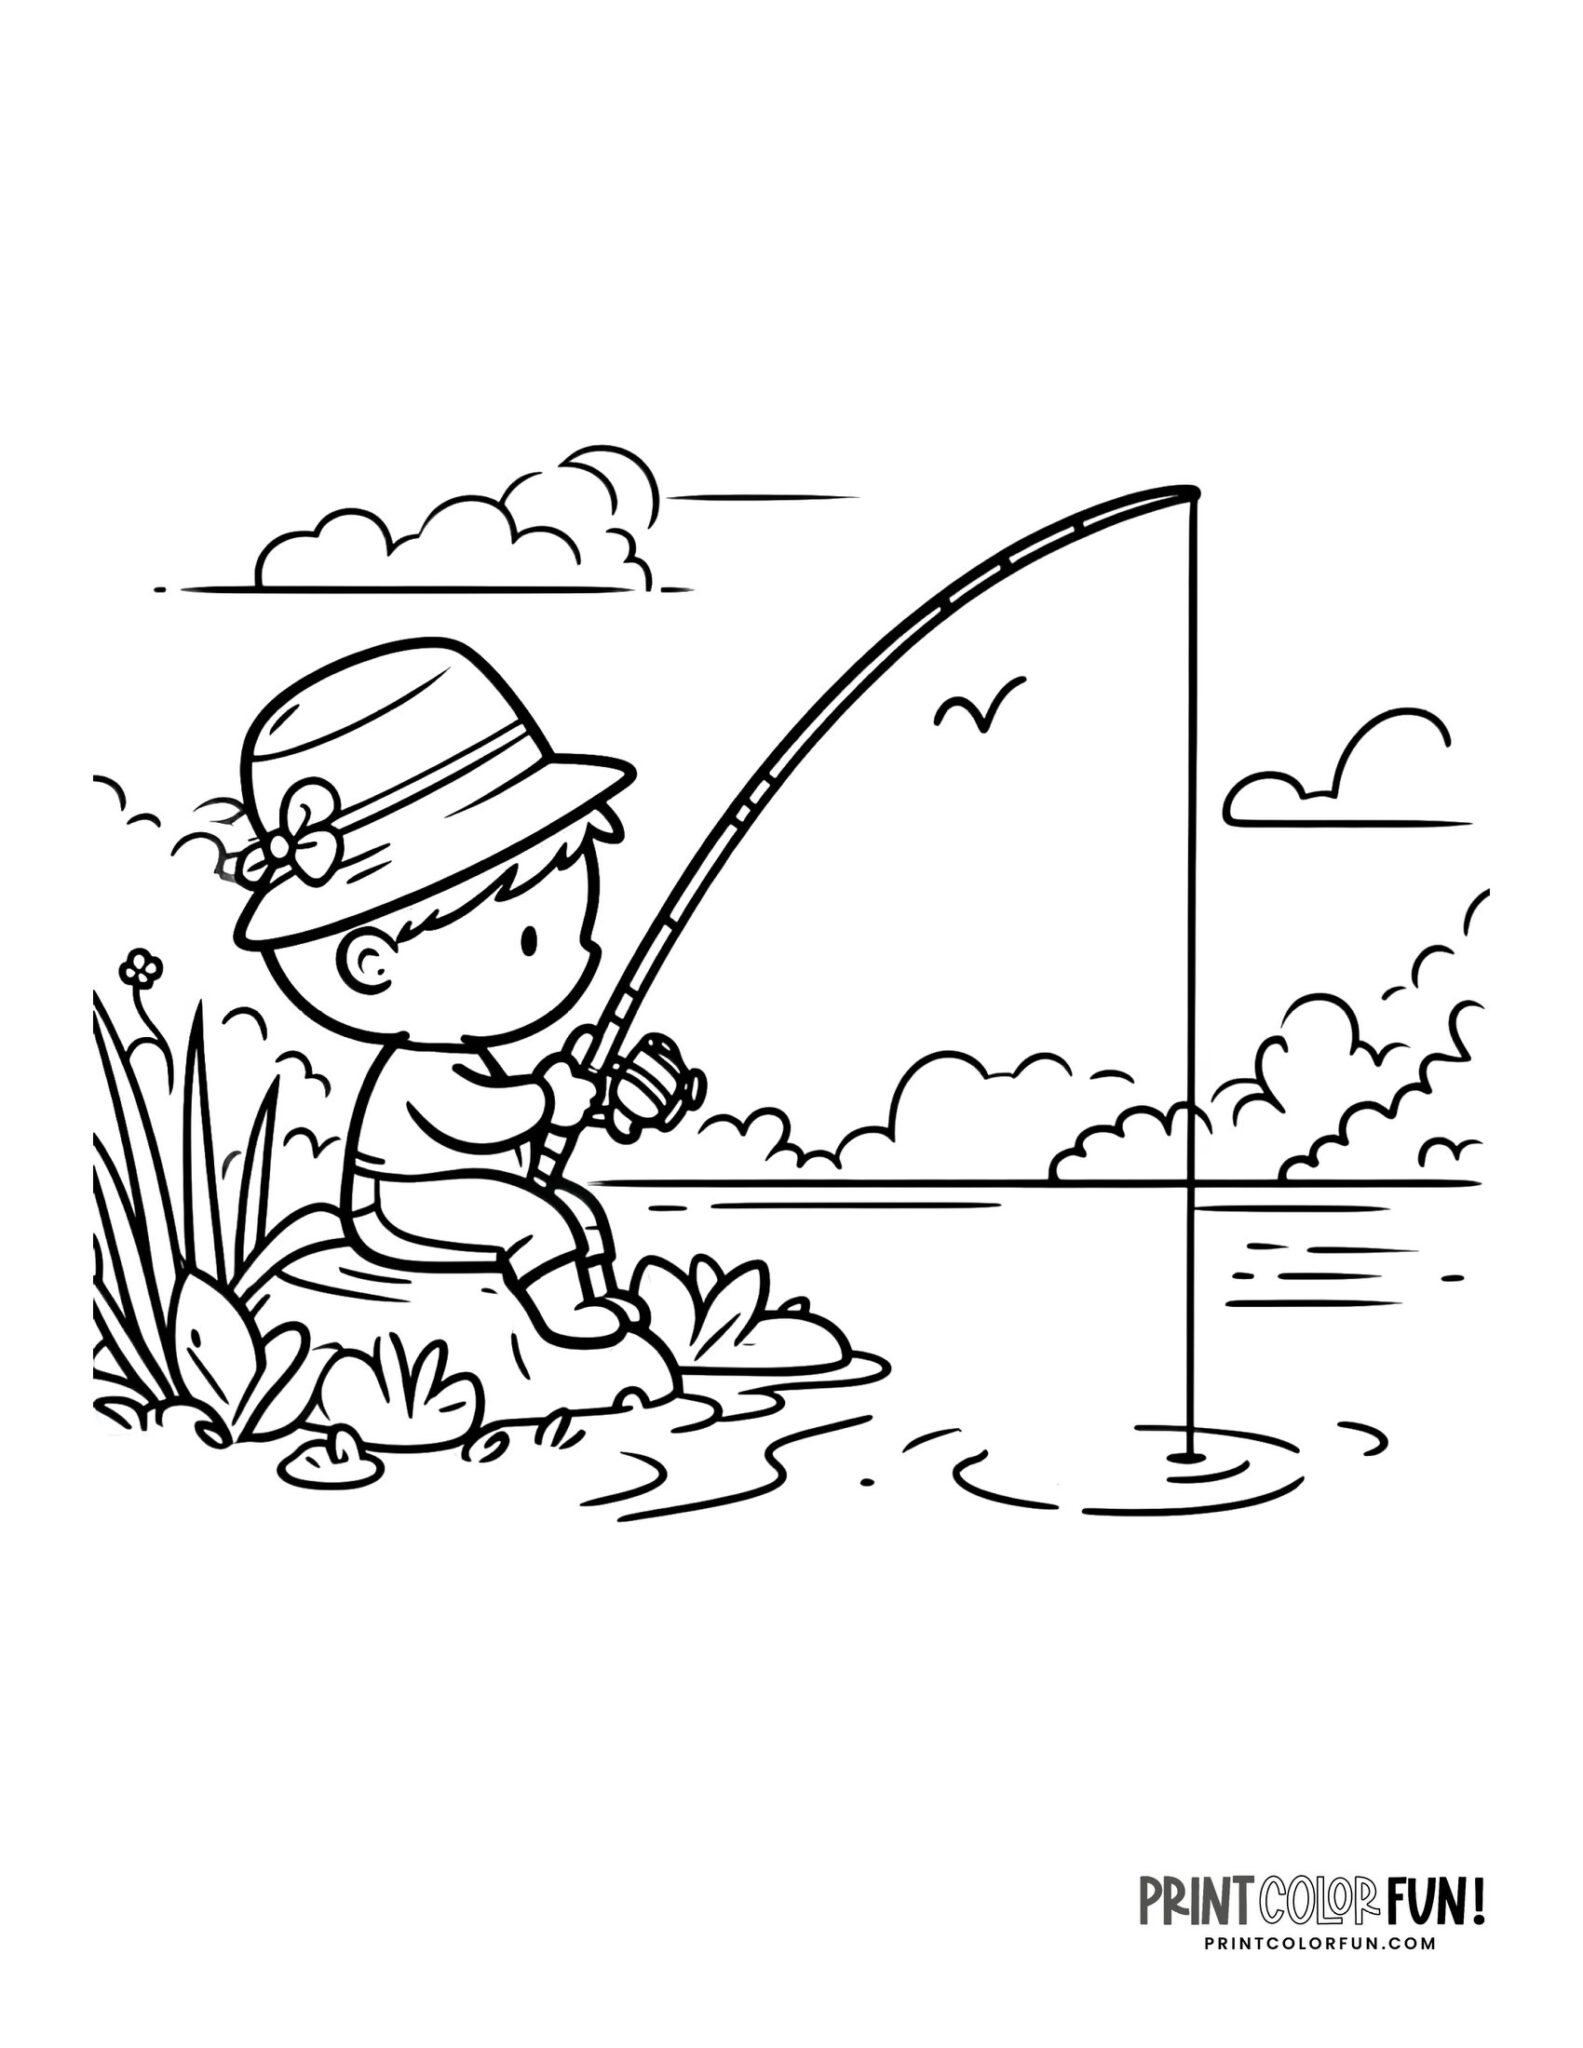 5+ Kids fishing clipart and coloring pages plus crafts, activities, and ...